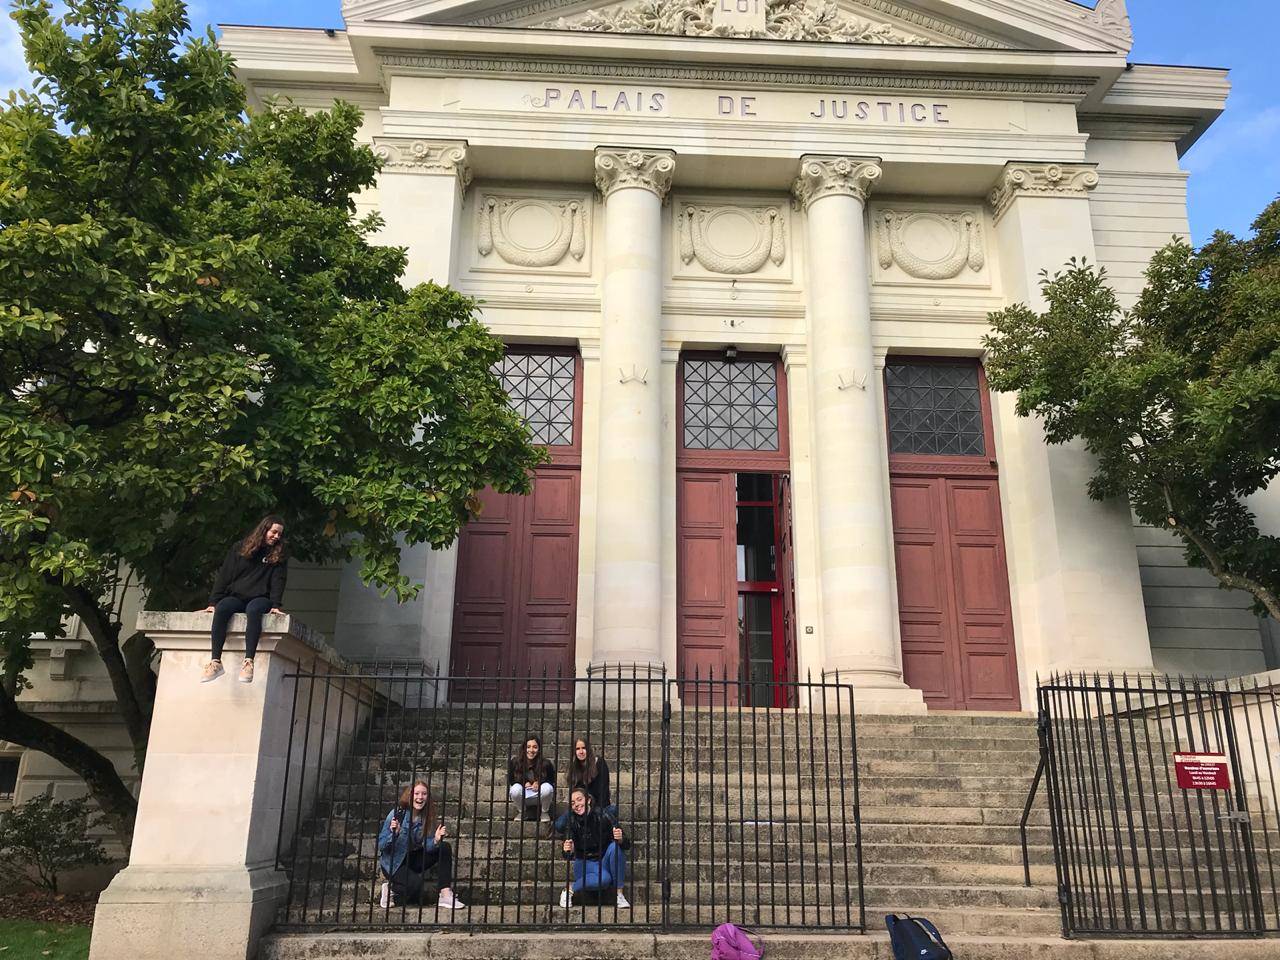 Exchange students at my school participating in a scavenger hunt to explore Cholet, France on Sept. 14, 2018. (Bridget McTague | For the Juneau Empire)